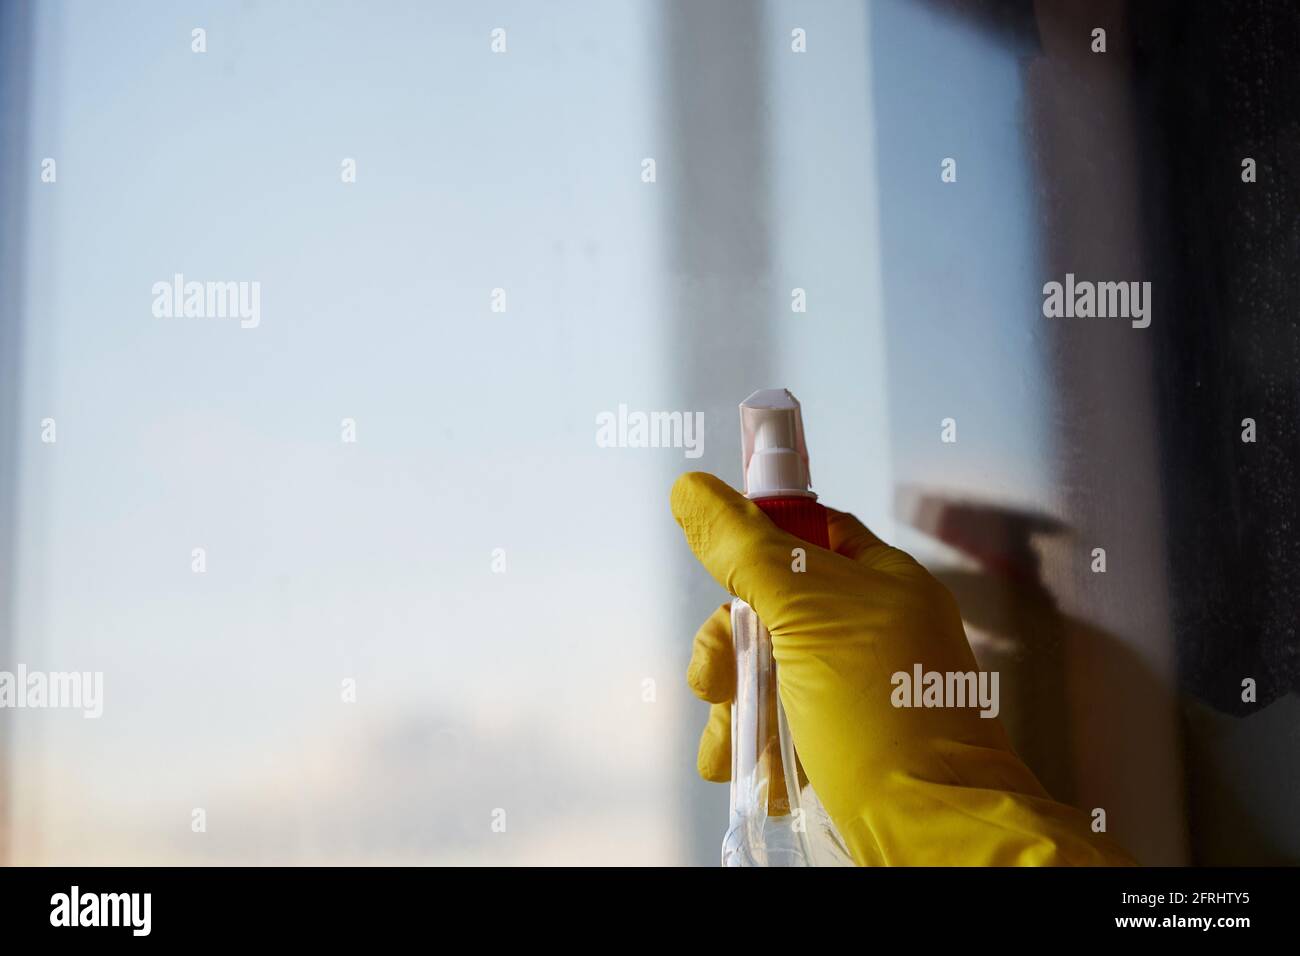 Spring cleaning concept. Sanitize and cleanliness through the pandemic, covid 19. Hand is washing window at home at evening light. Reflection effect. Copy space Stock Photo